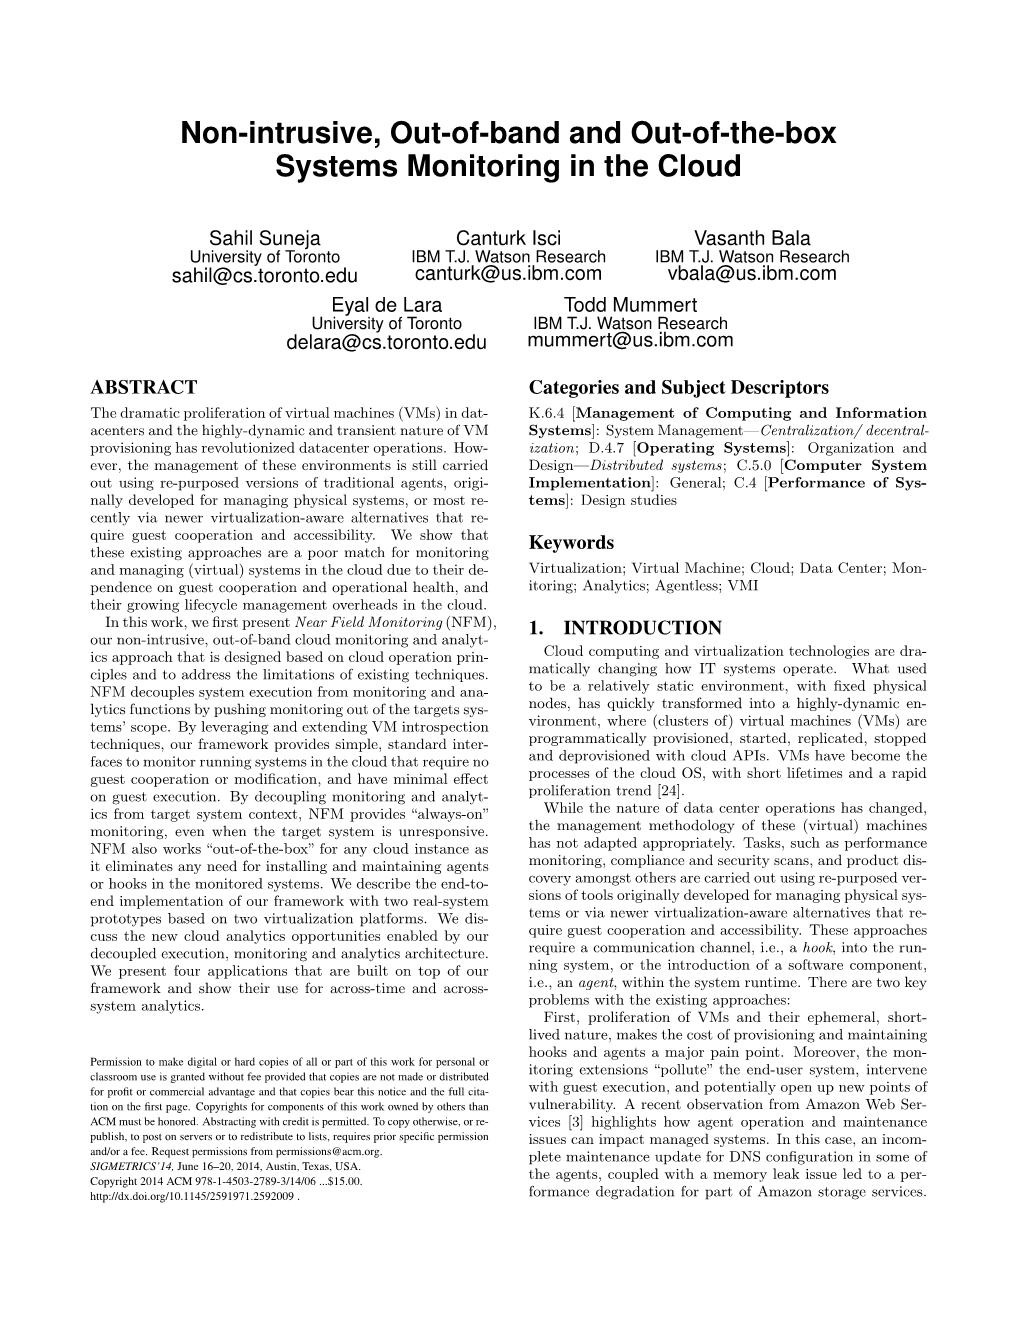 Non-Intrusive, Out-Of-Band and Out-Of-The-Box Systems Monitoring in the Cloud